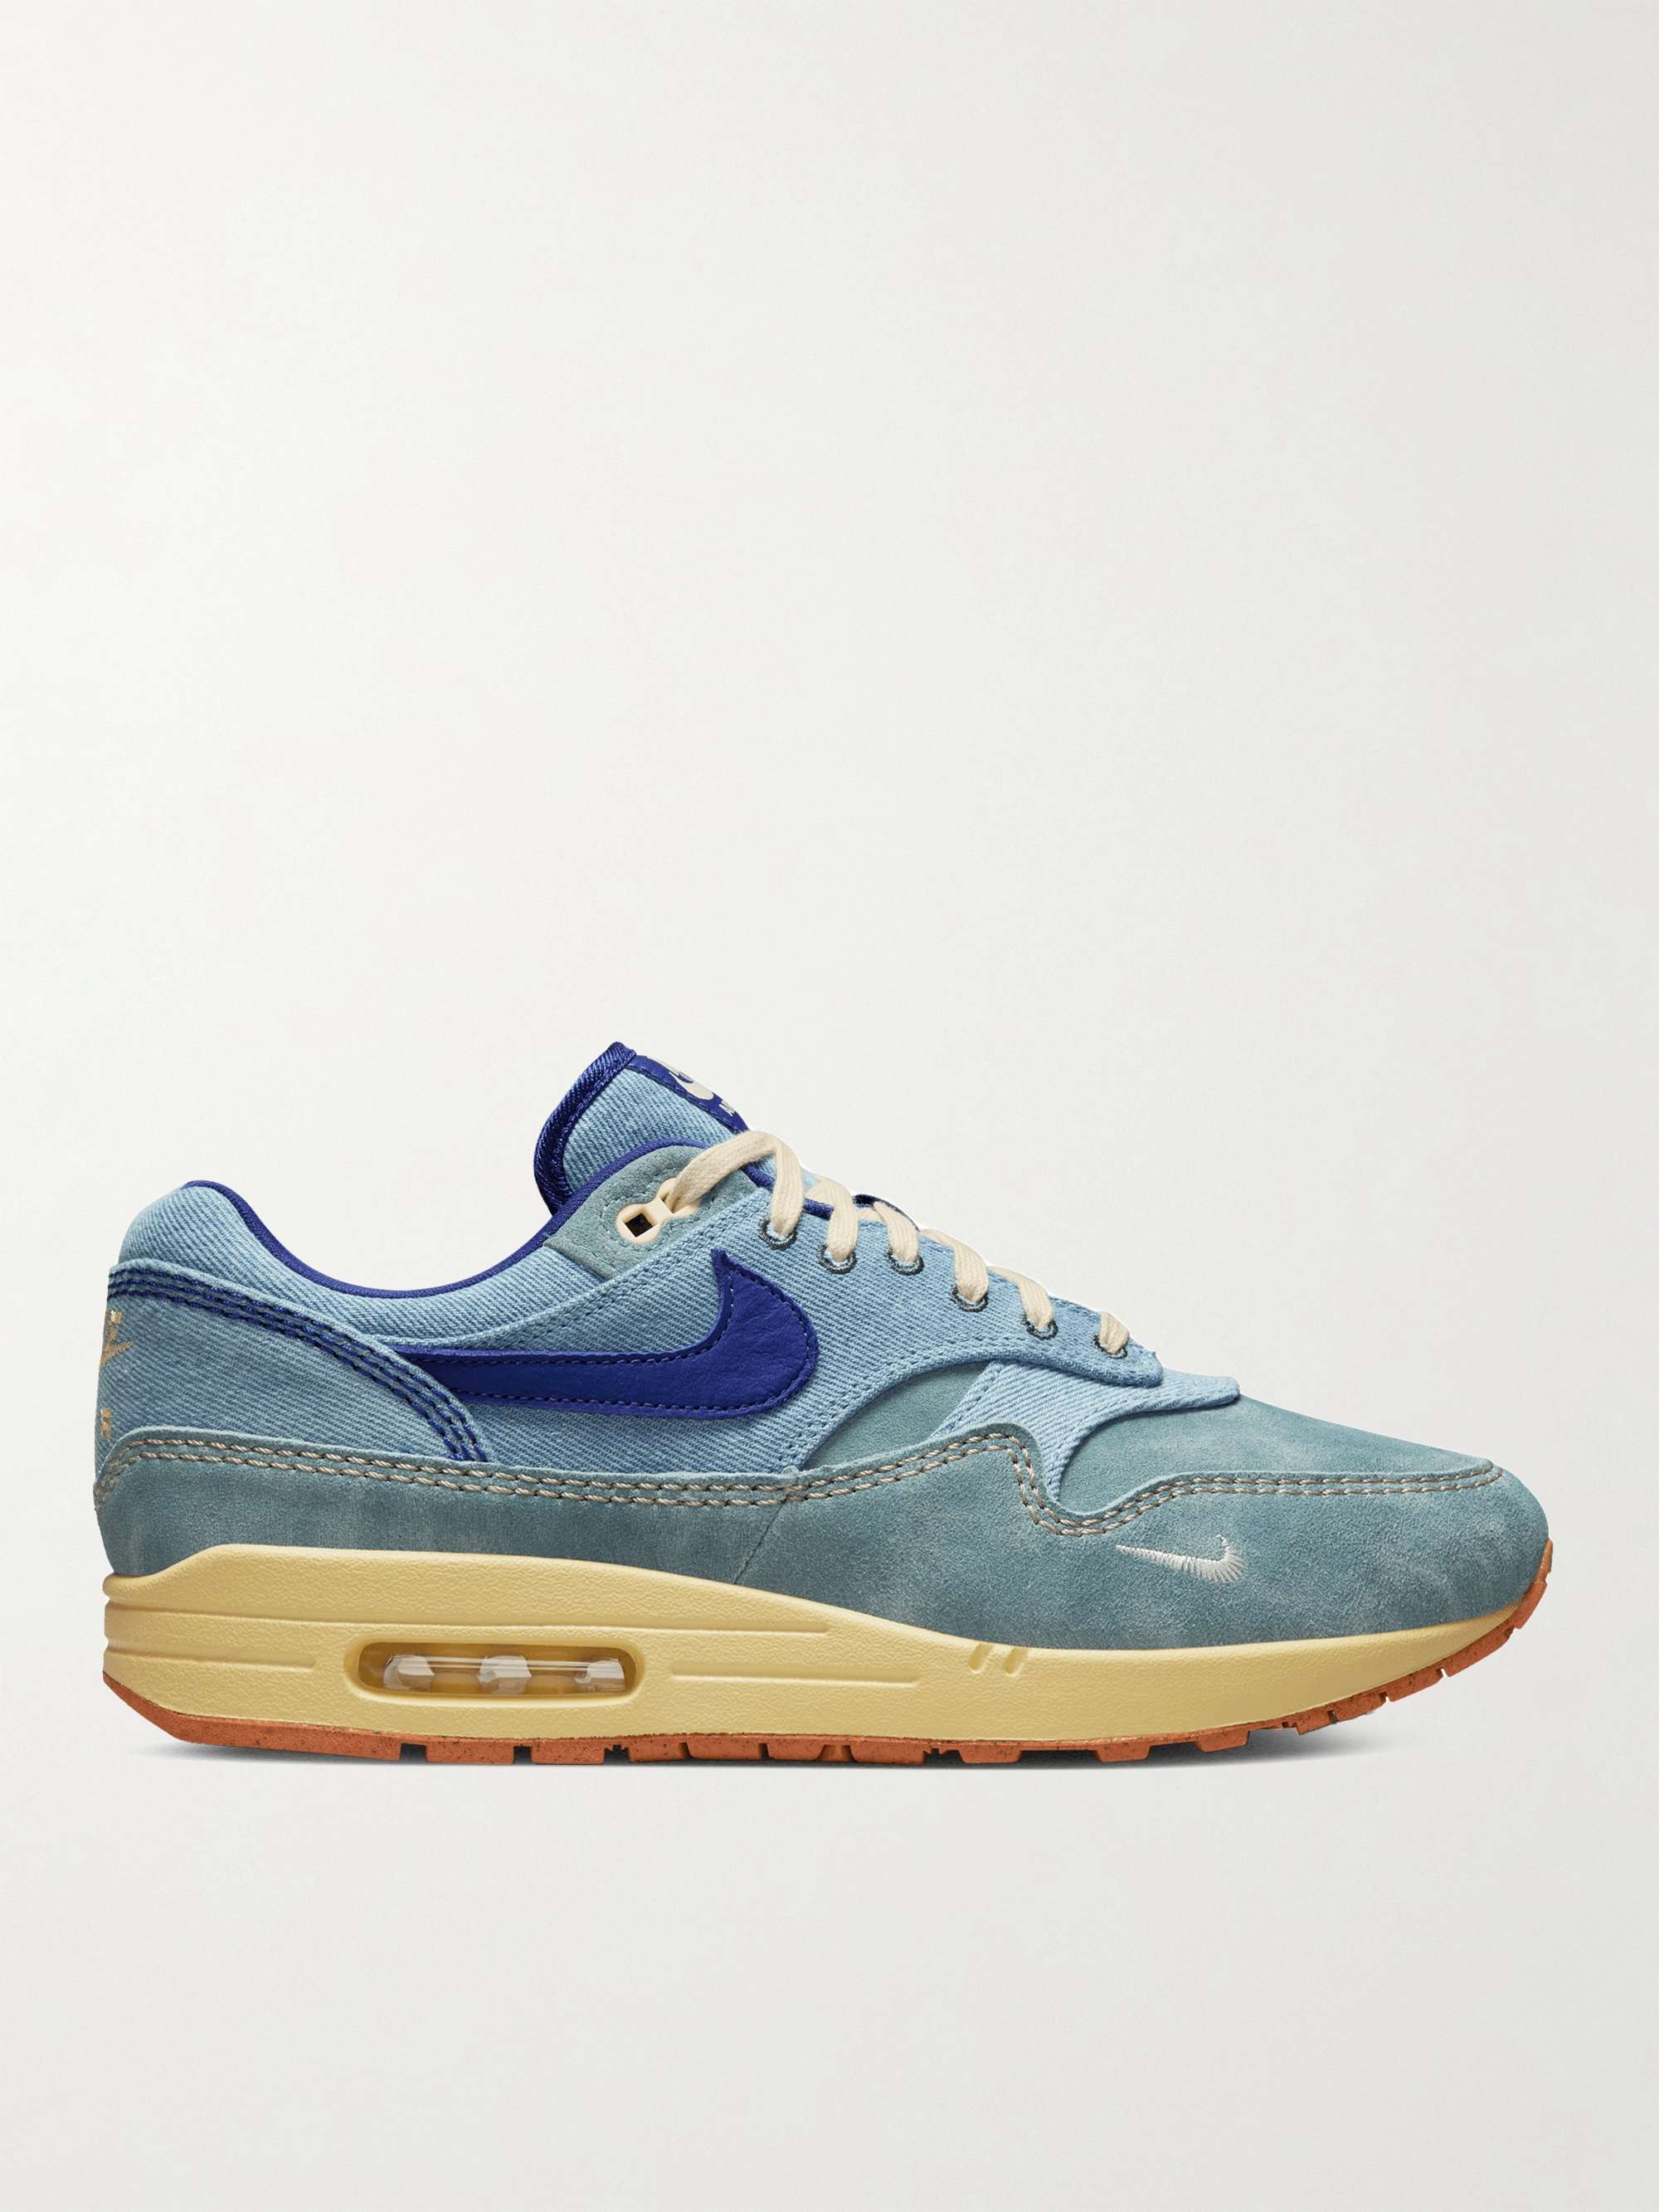 NIKE Air Max 1 PRM Denim and Suede Sneakers | MR PORTER